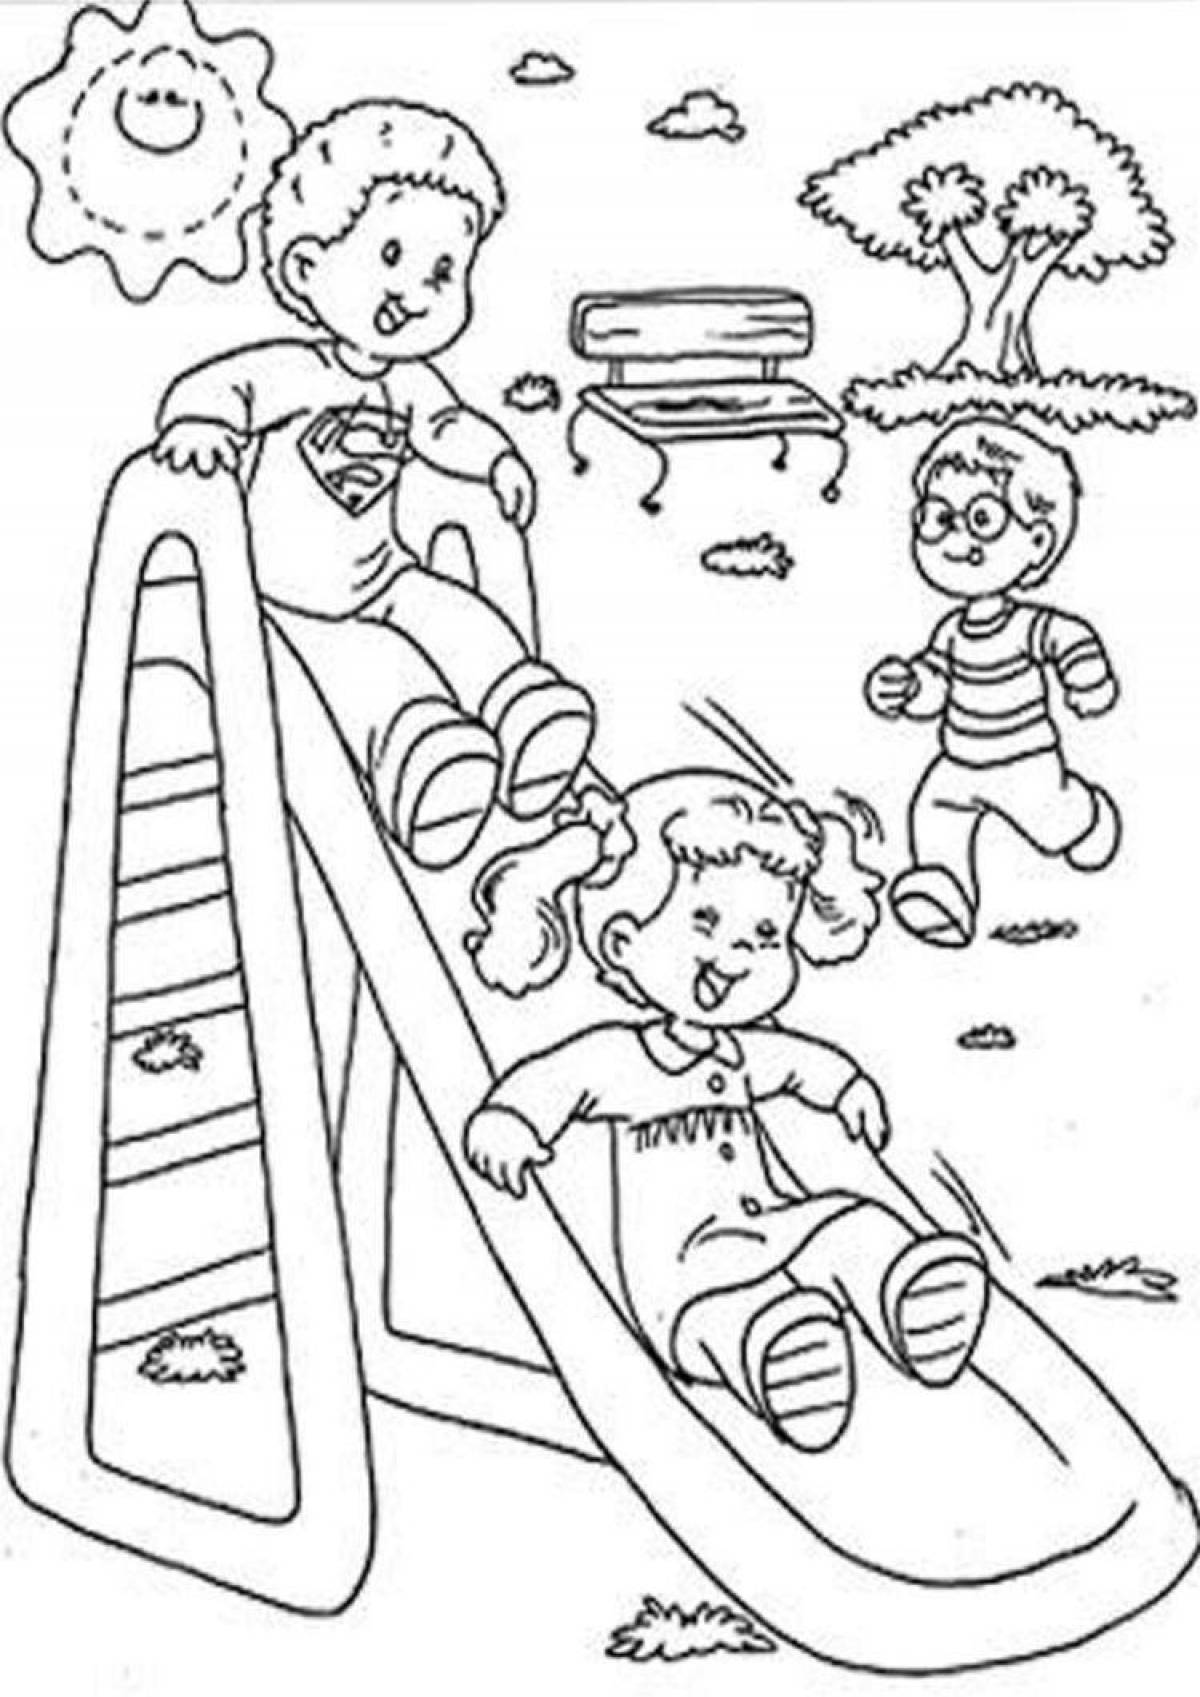 Great childhood coloring book